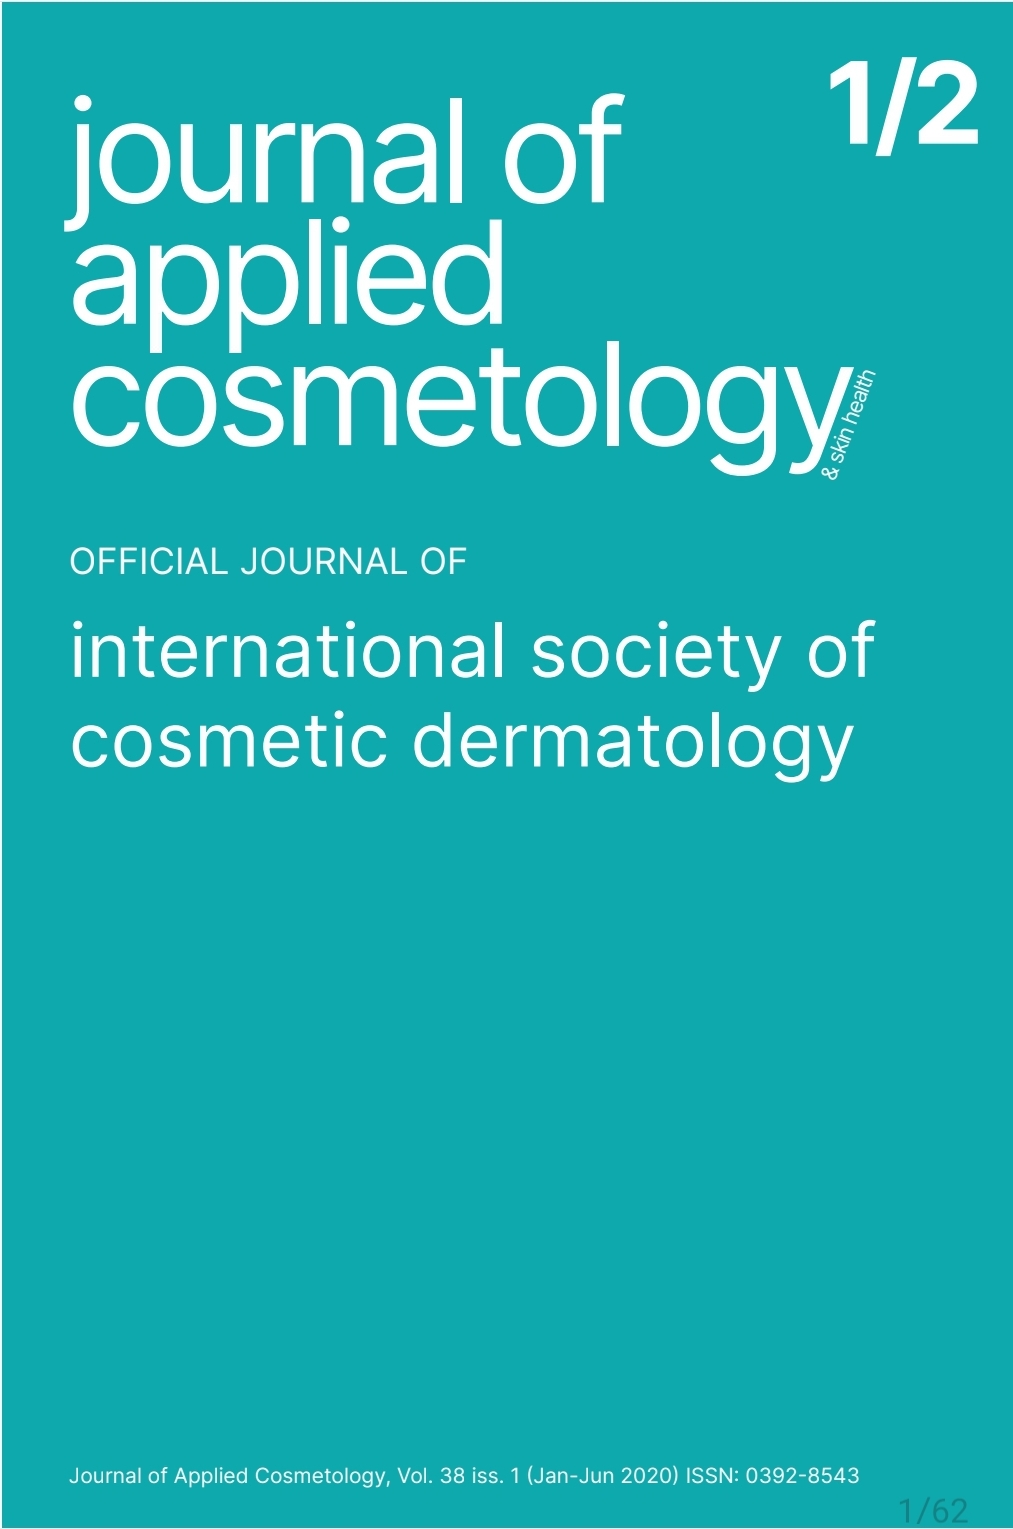 					View Vol. 38 No. 1 (2020): Journal of Applied Cosmetology
				